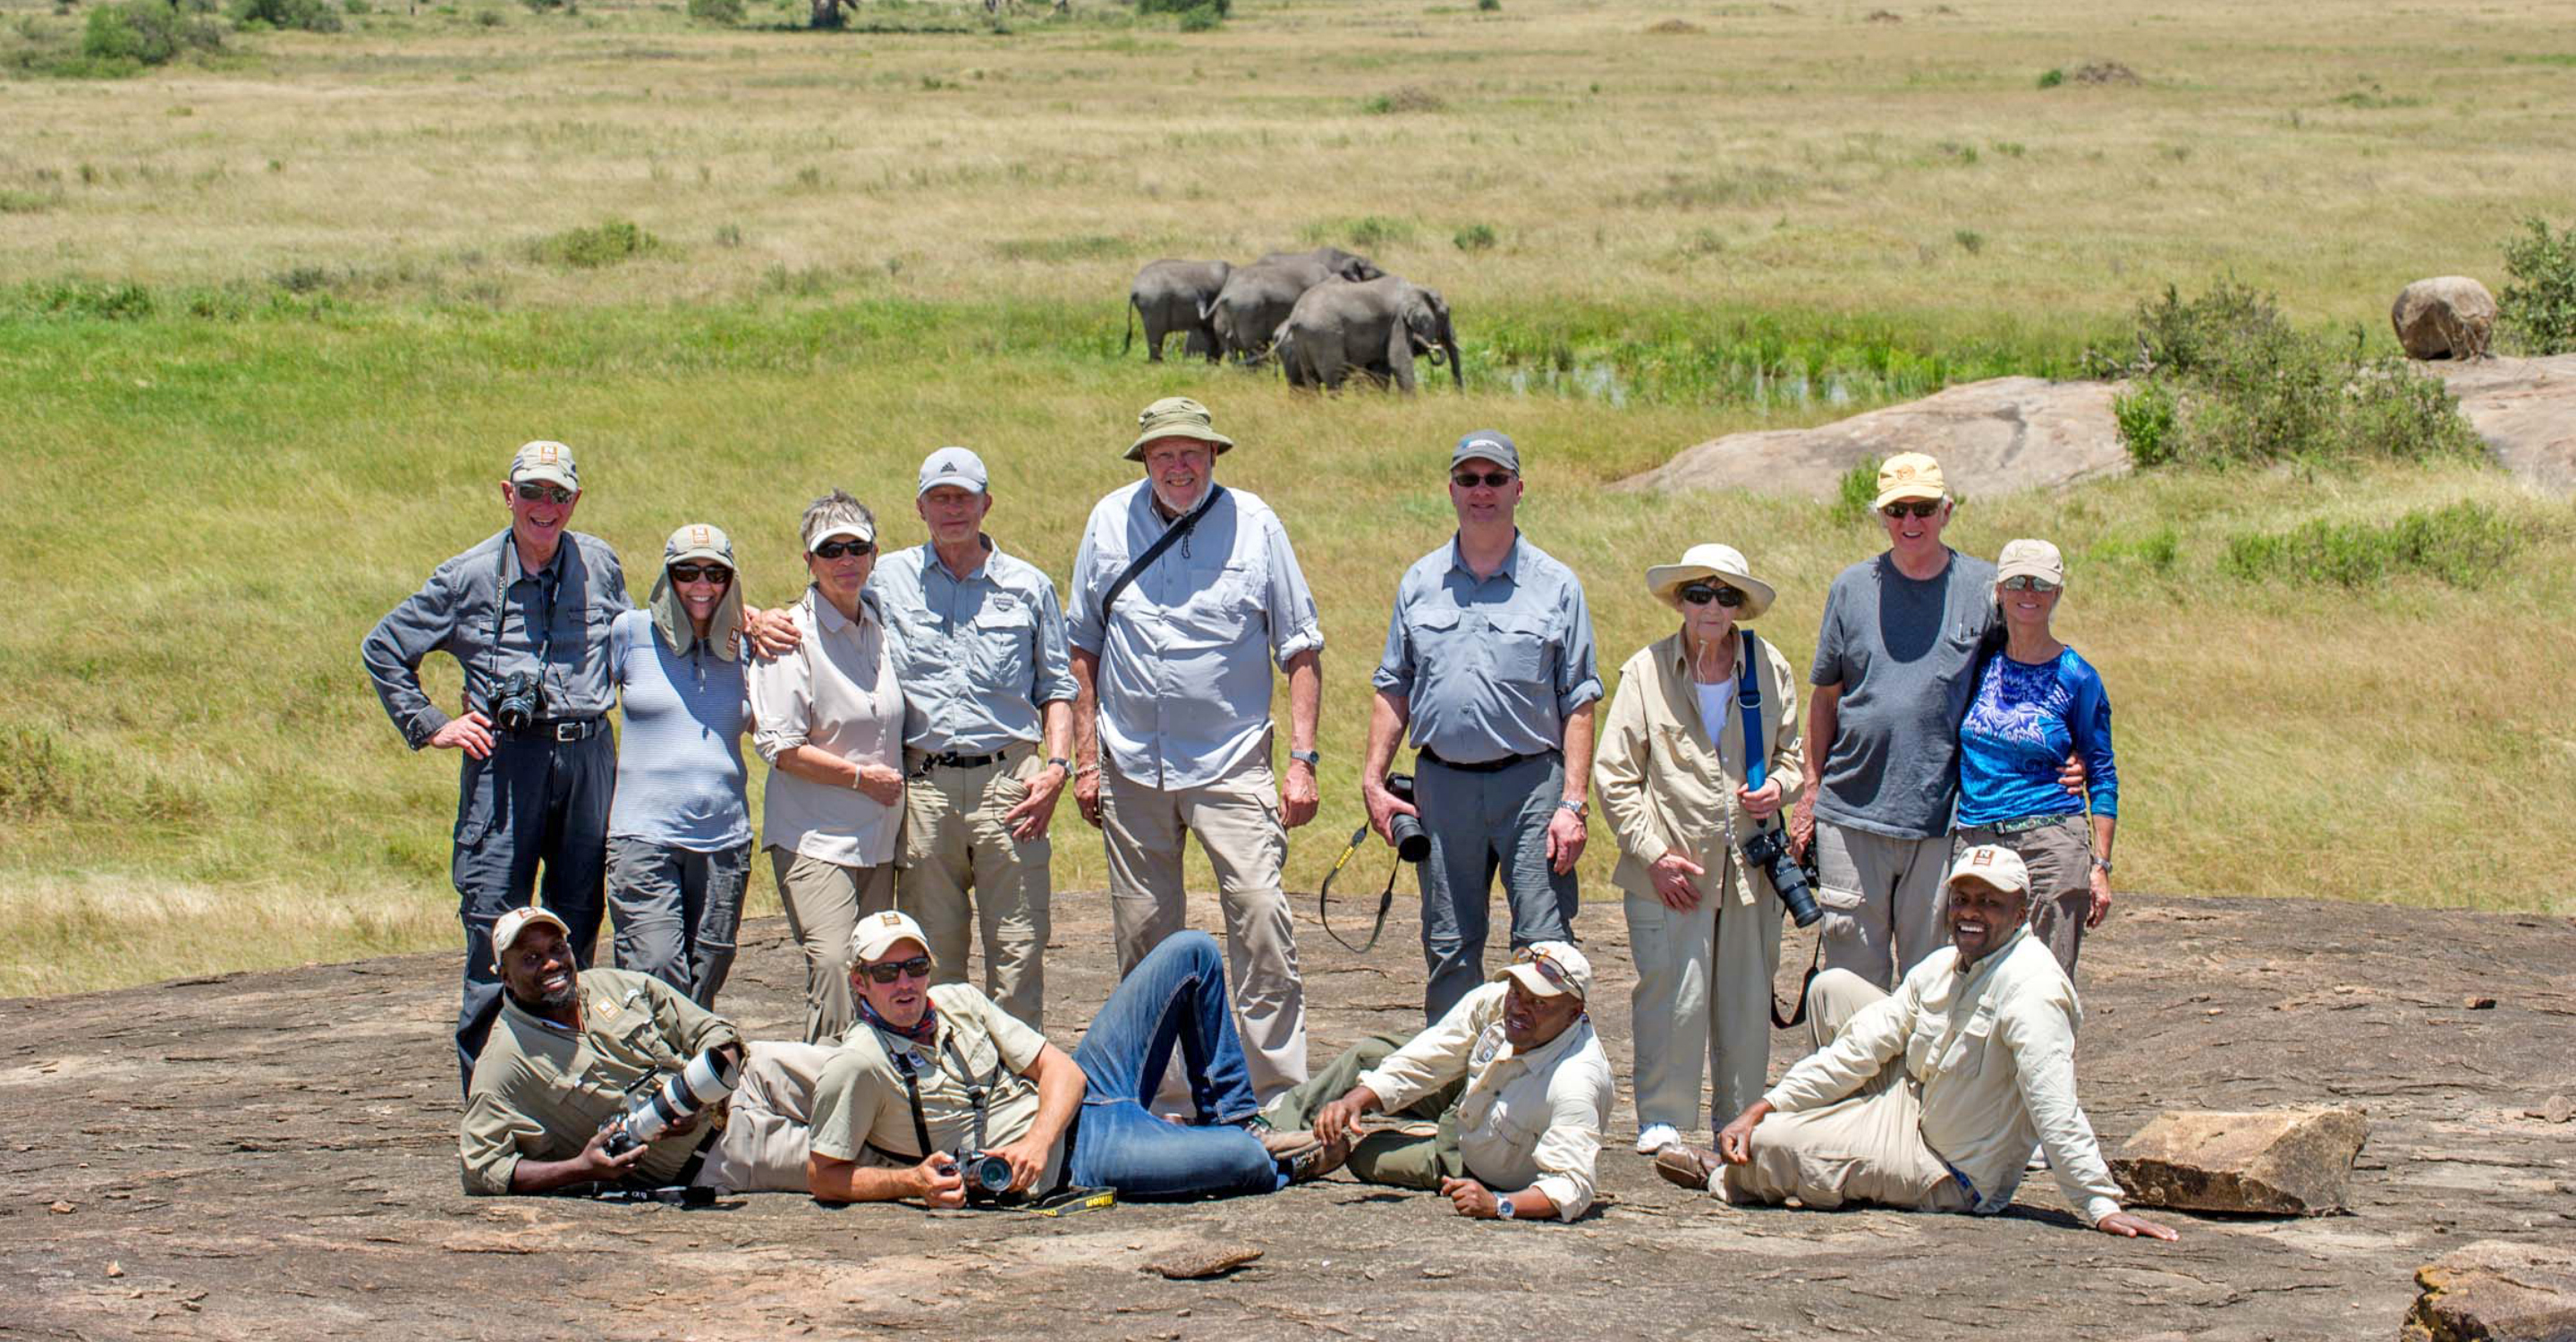 A group of Natural Habitat Adventures travelers and guides pose on a hill near African elephants in the Ngorongoro Crater, Tanzania